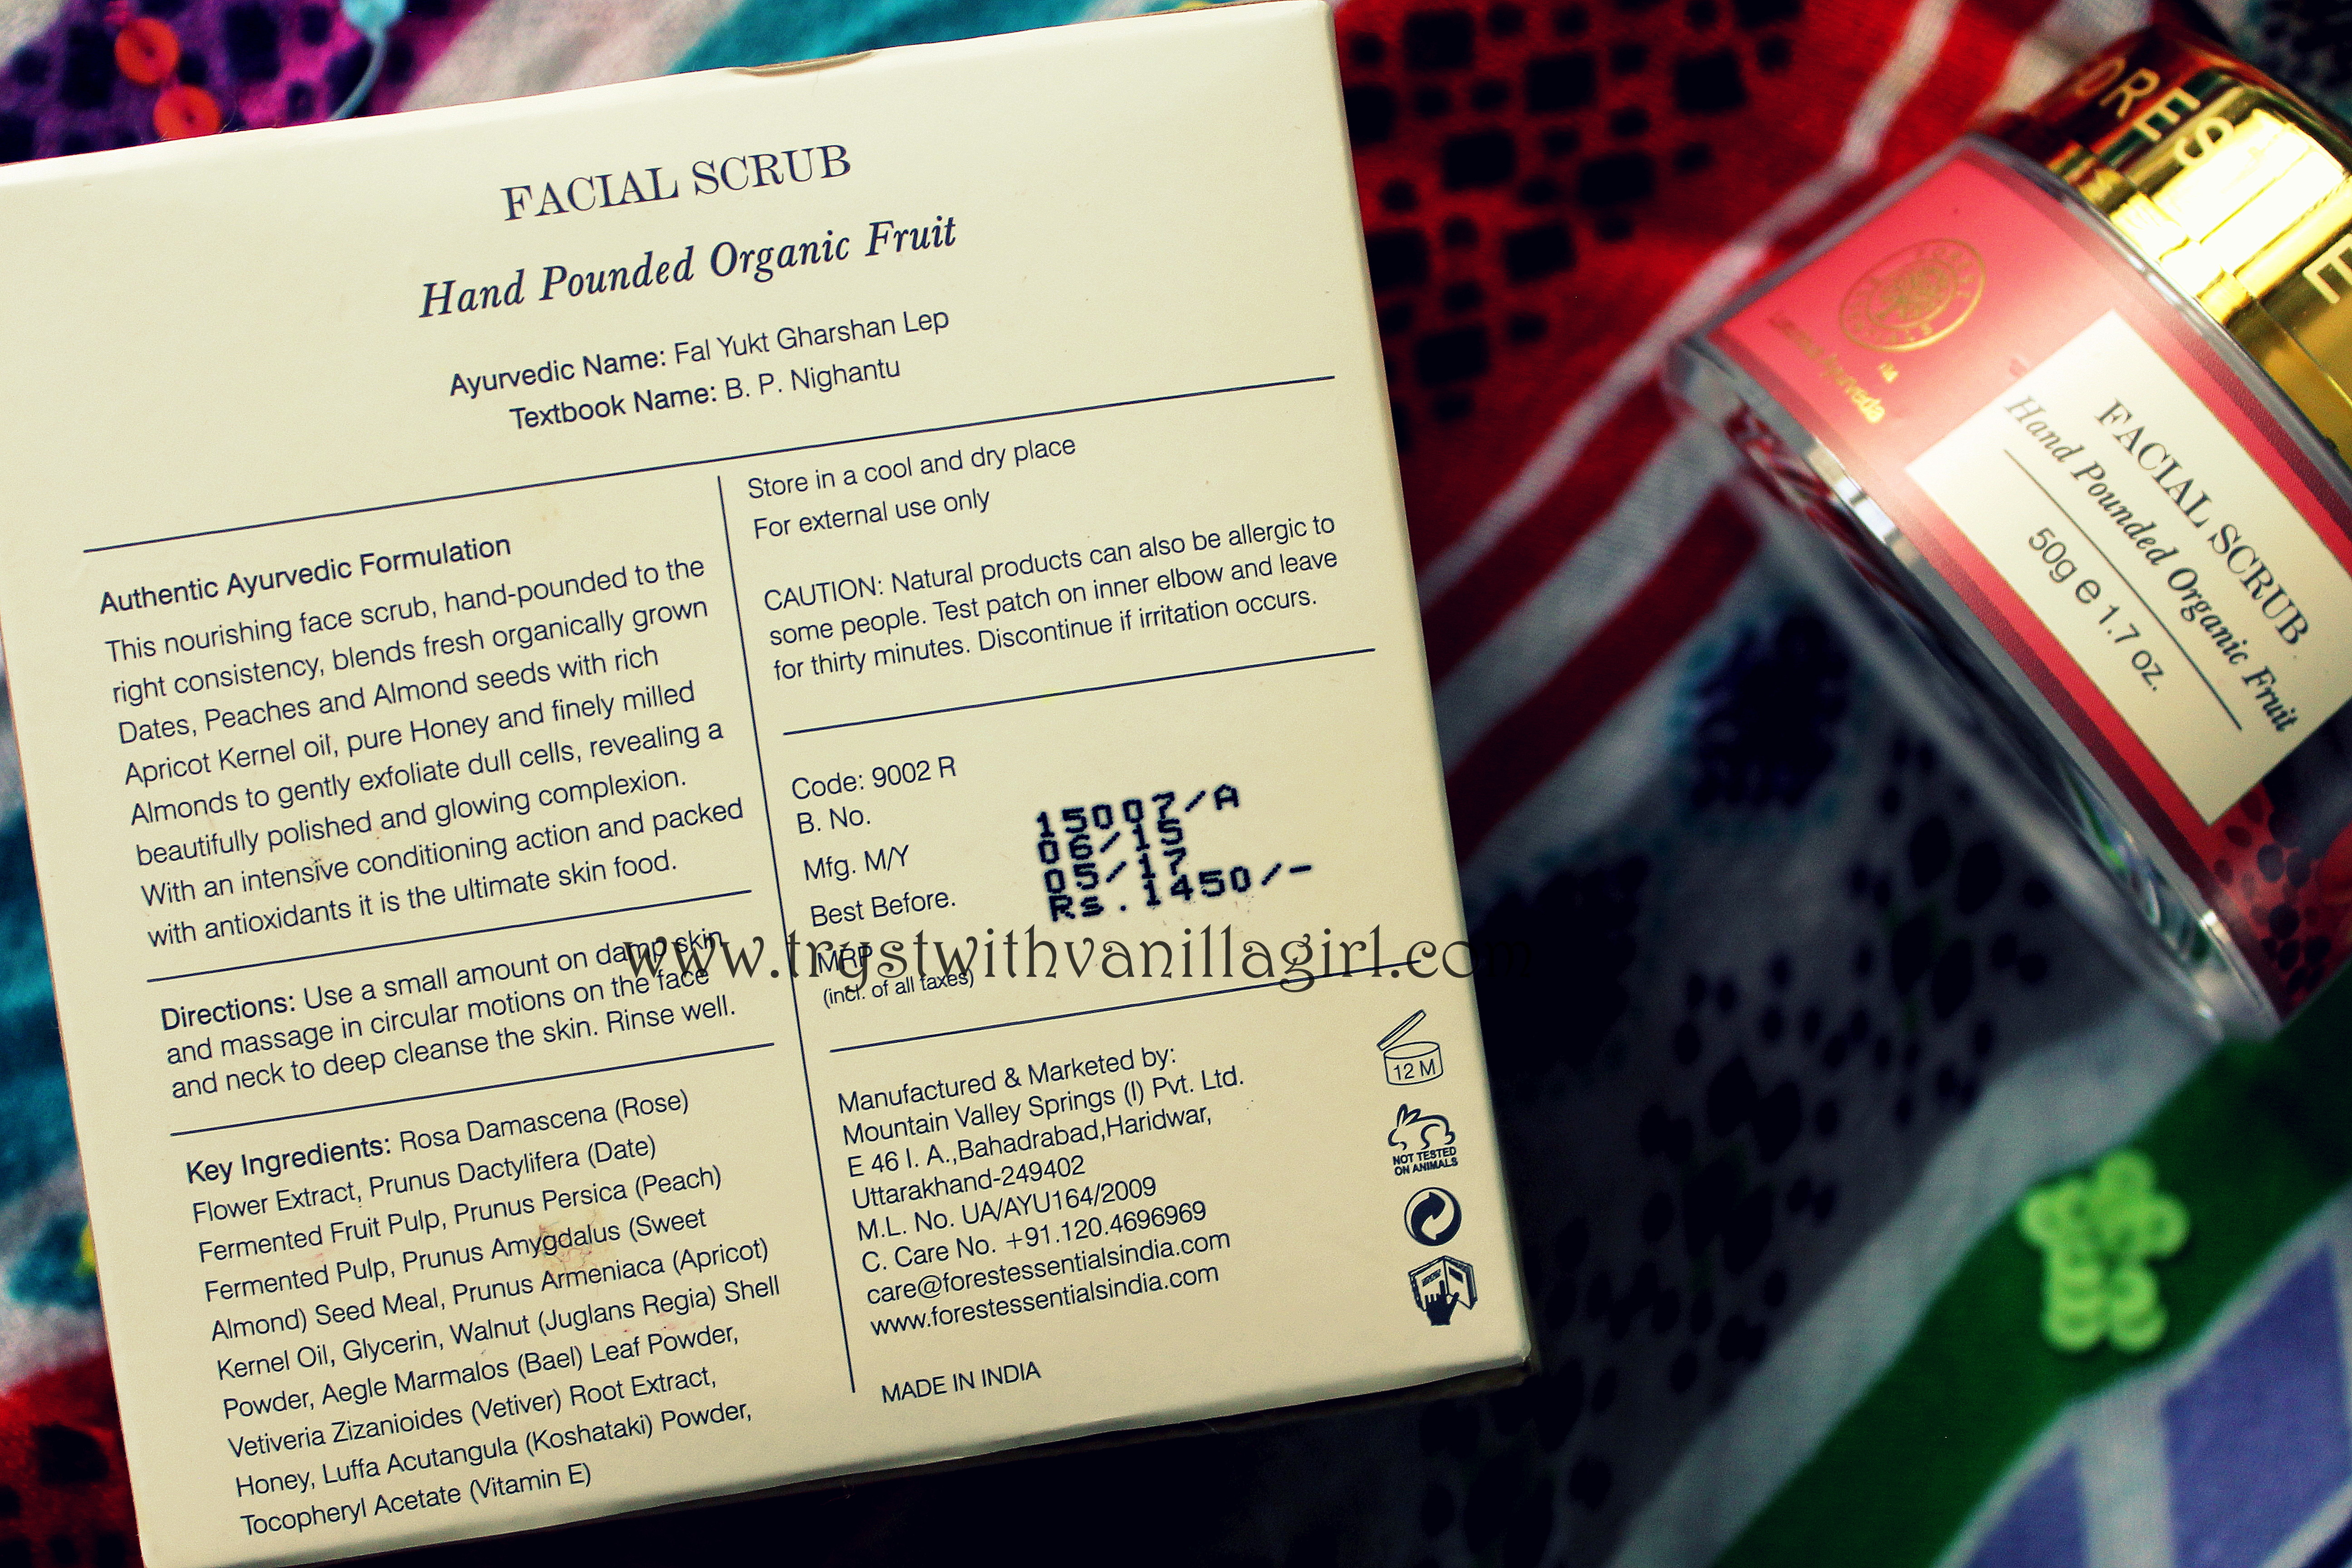 Forest Essentials Hand Pounded Organic Fruit Scrub Review, Price, Buy Online